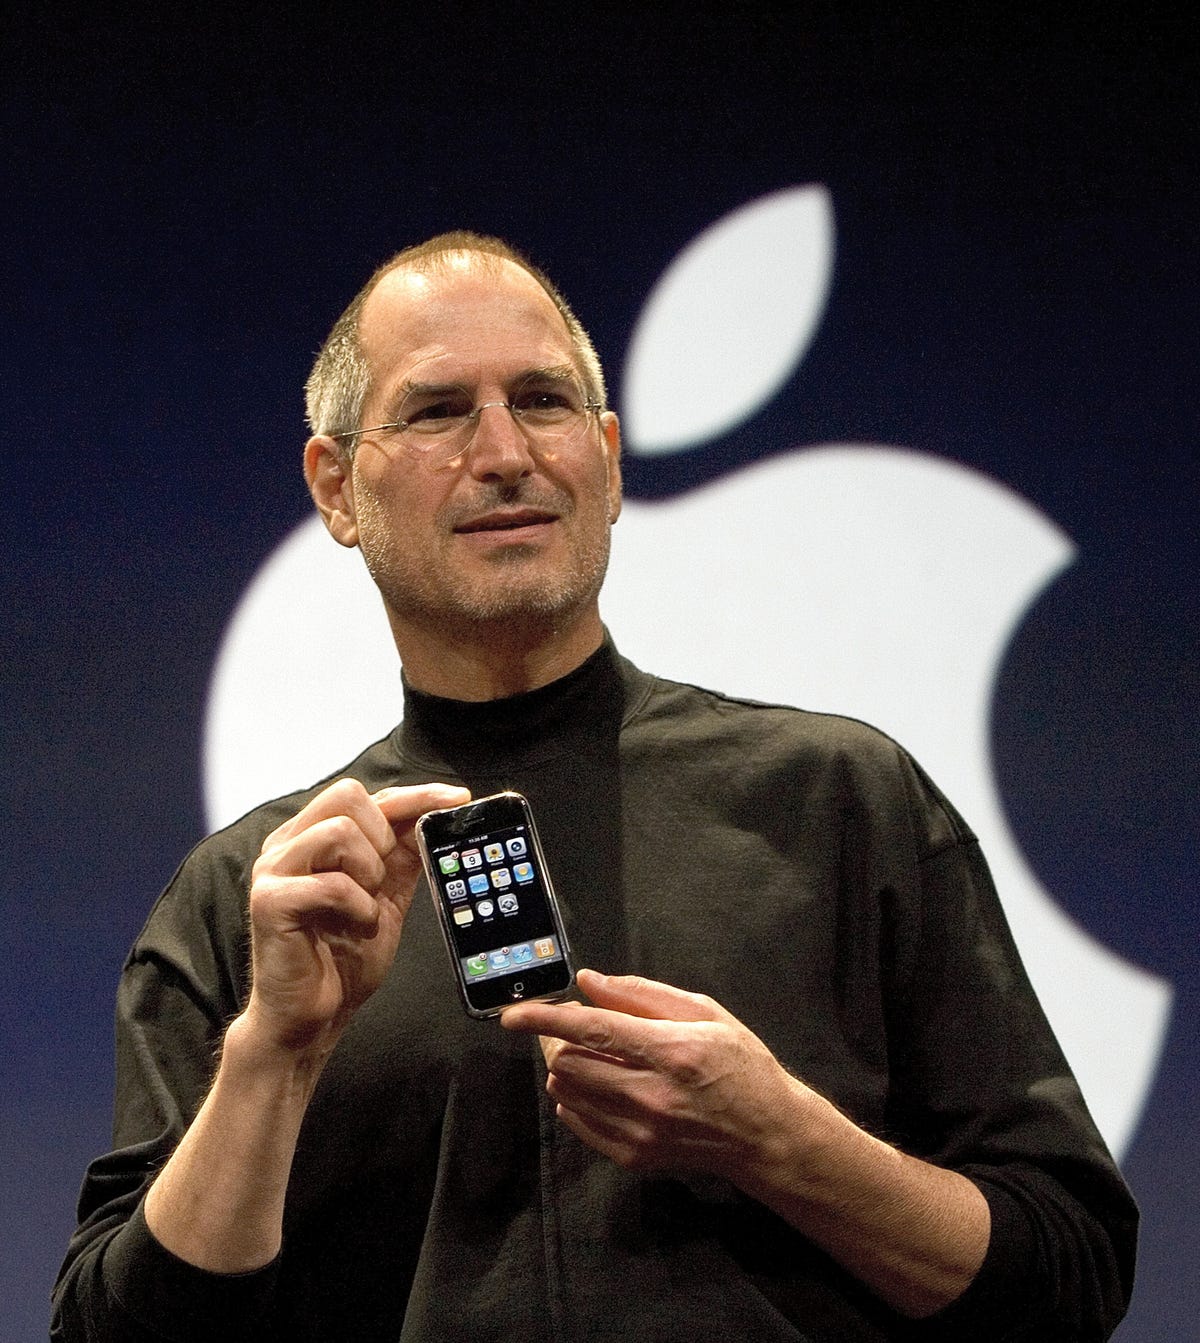 15 Years Ago: The Day Steve Jobs and the iPhone Made History
                        Commentary: Apple's co-founder knew the iPhone would change everything, from the moment he took the stage. Here's what I remember from that event.